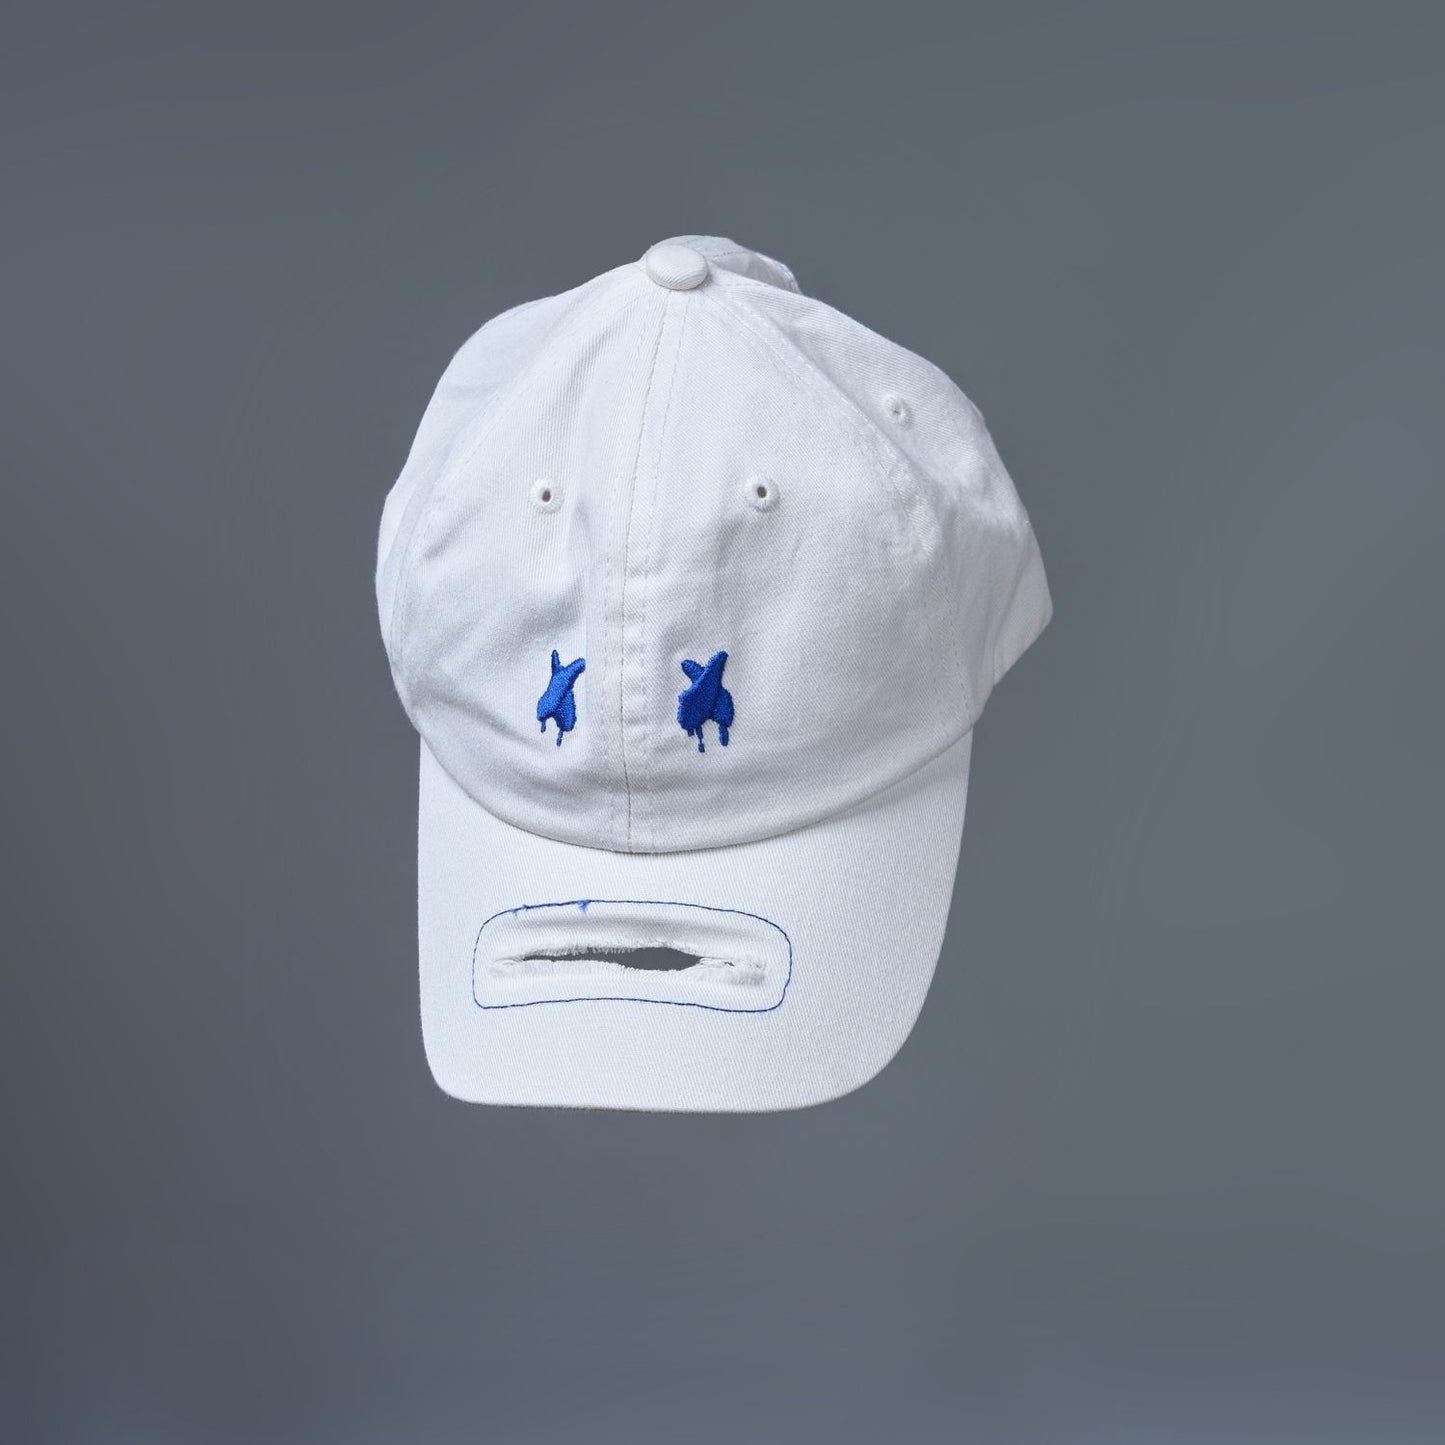 white colored, wide brim cap for men with adjustable strap.